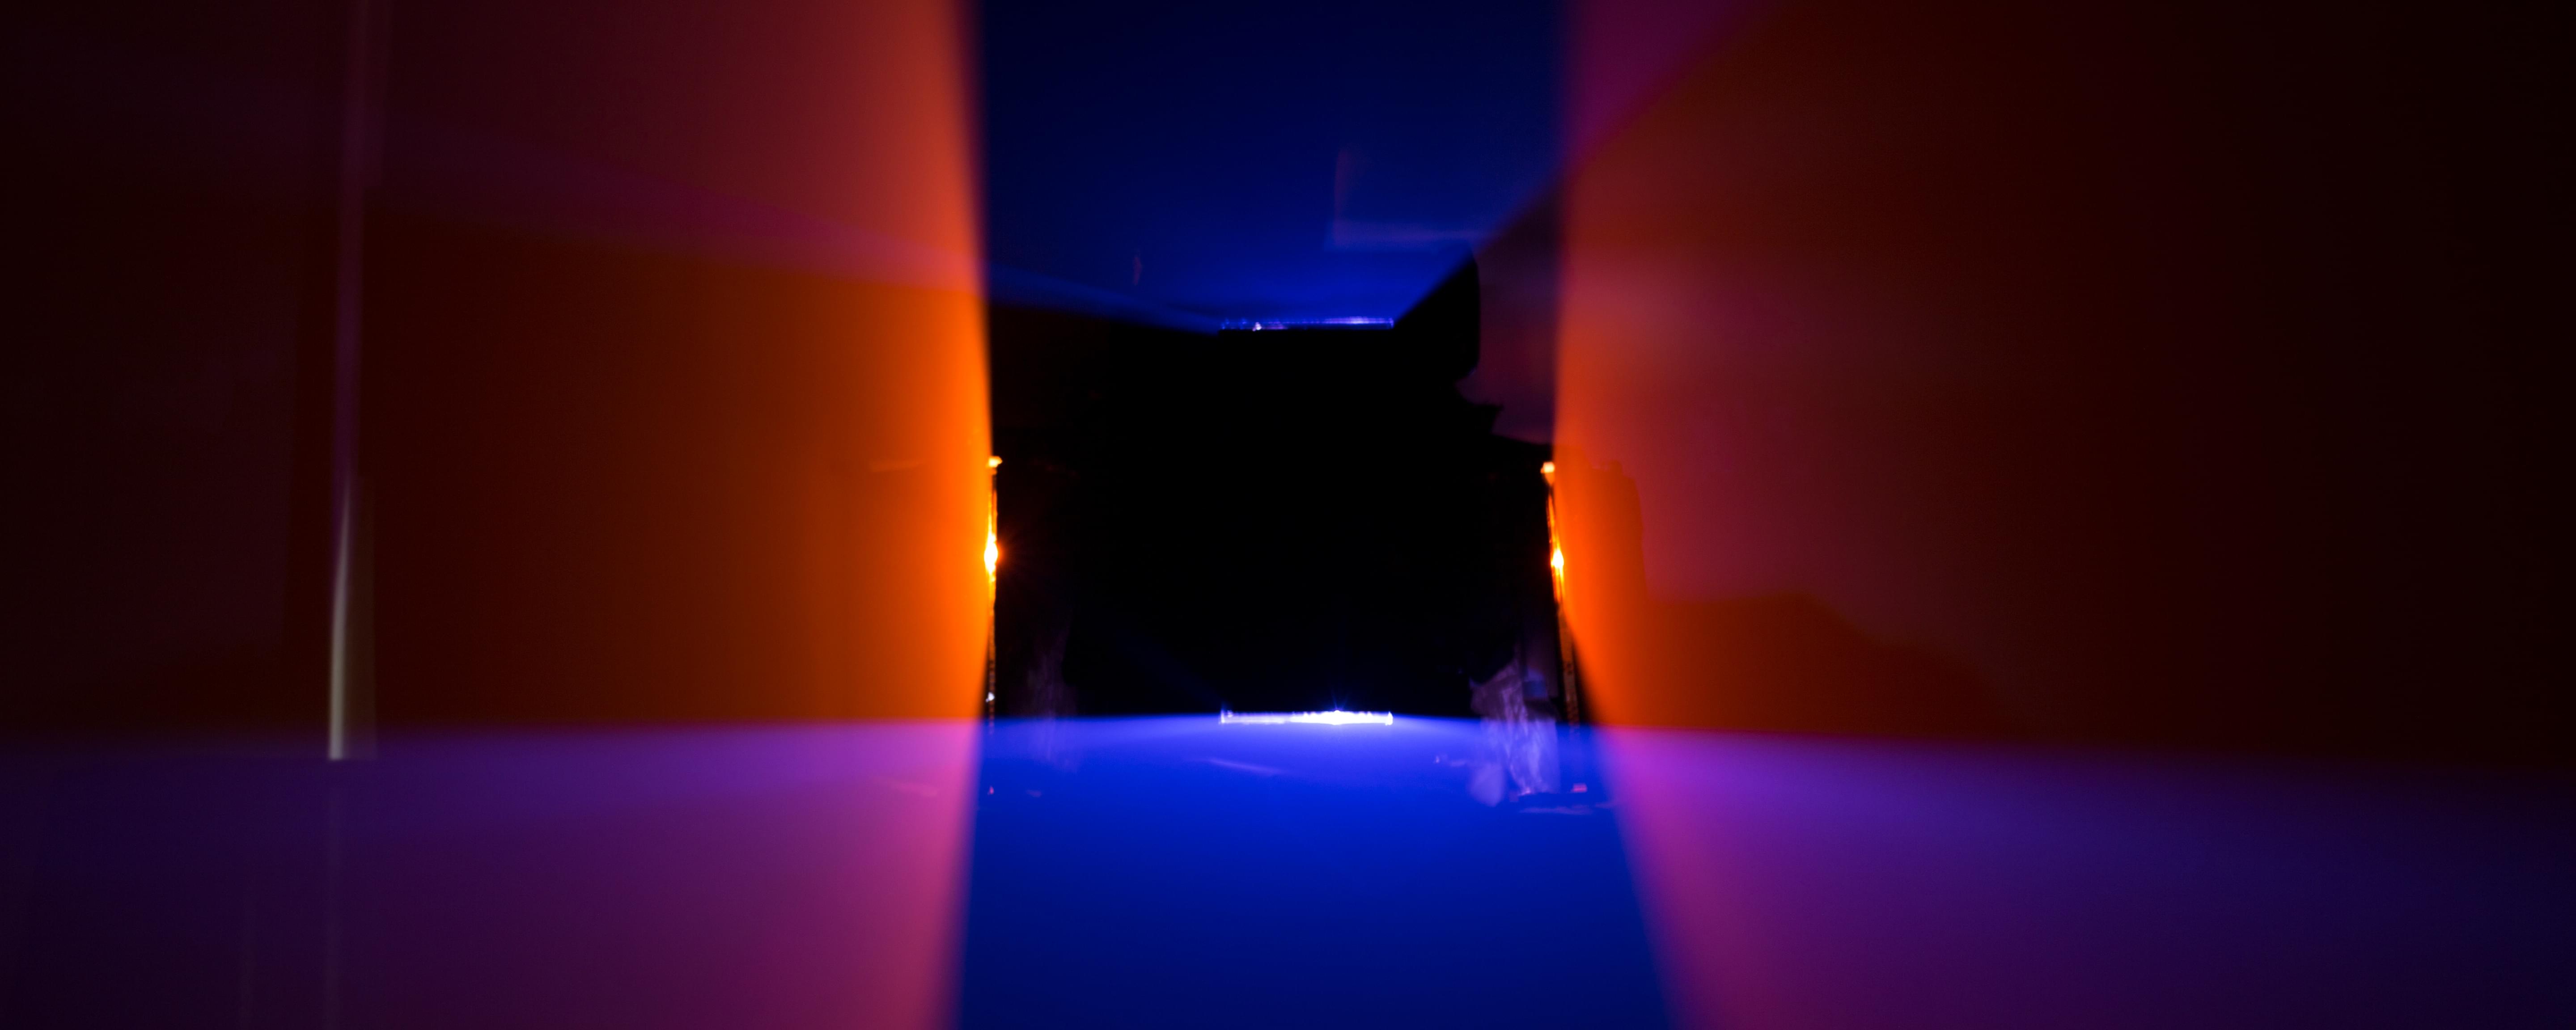 Very strange photograph of a rectangular black hole in the middle, about the size of a cafeteria lunch tray. Emanating from the top and bottom of the rectangular black hole are blue rhomboid planes of light that get wider as they approach the viewer. Emanating from the left and right side of the rectangular black hold are red-orange rhomboid planes of light that also get wider as they approach the viewer.